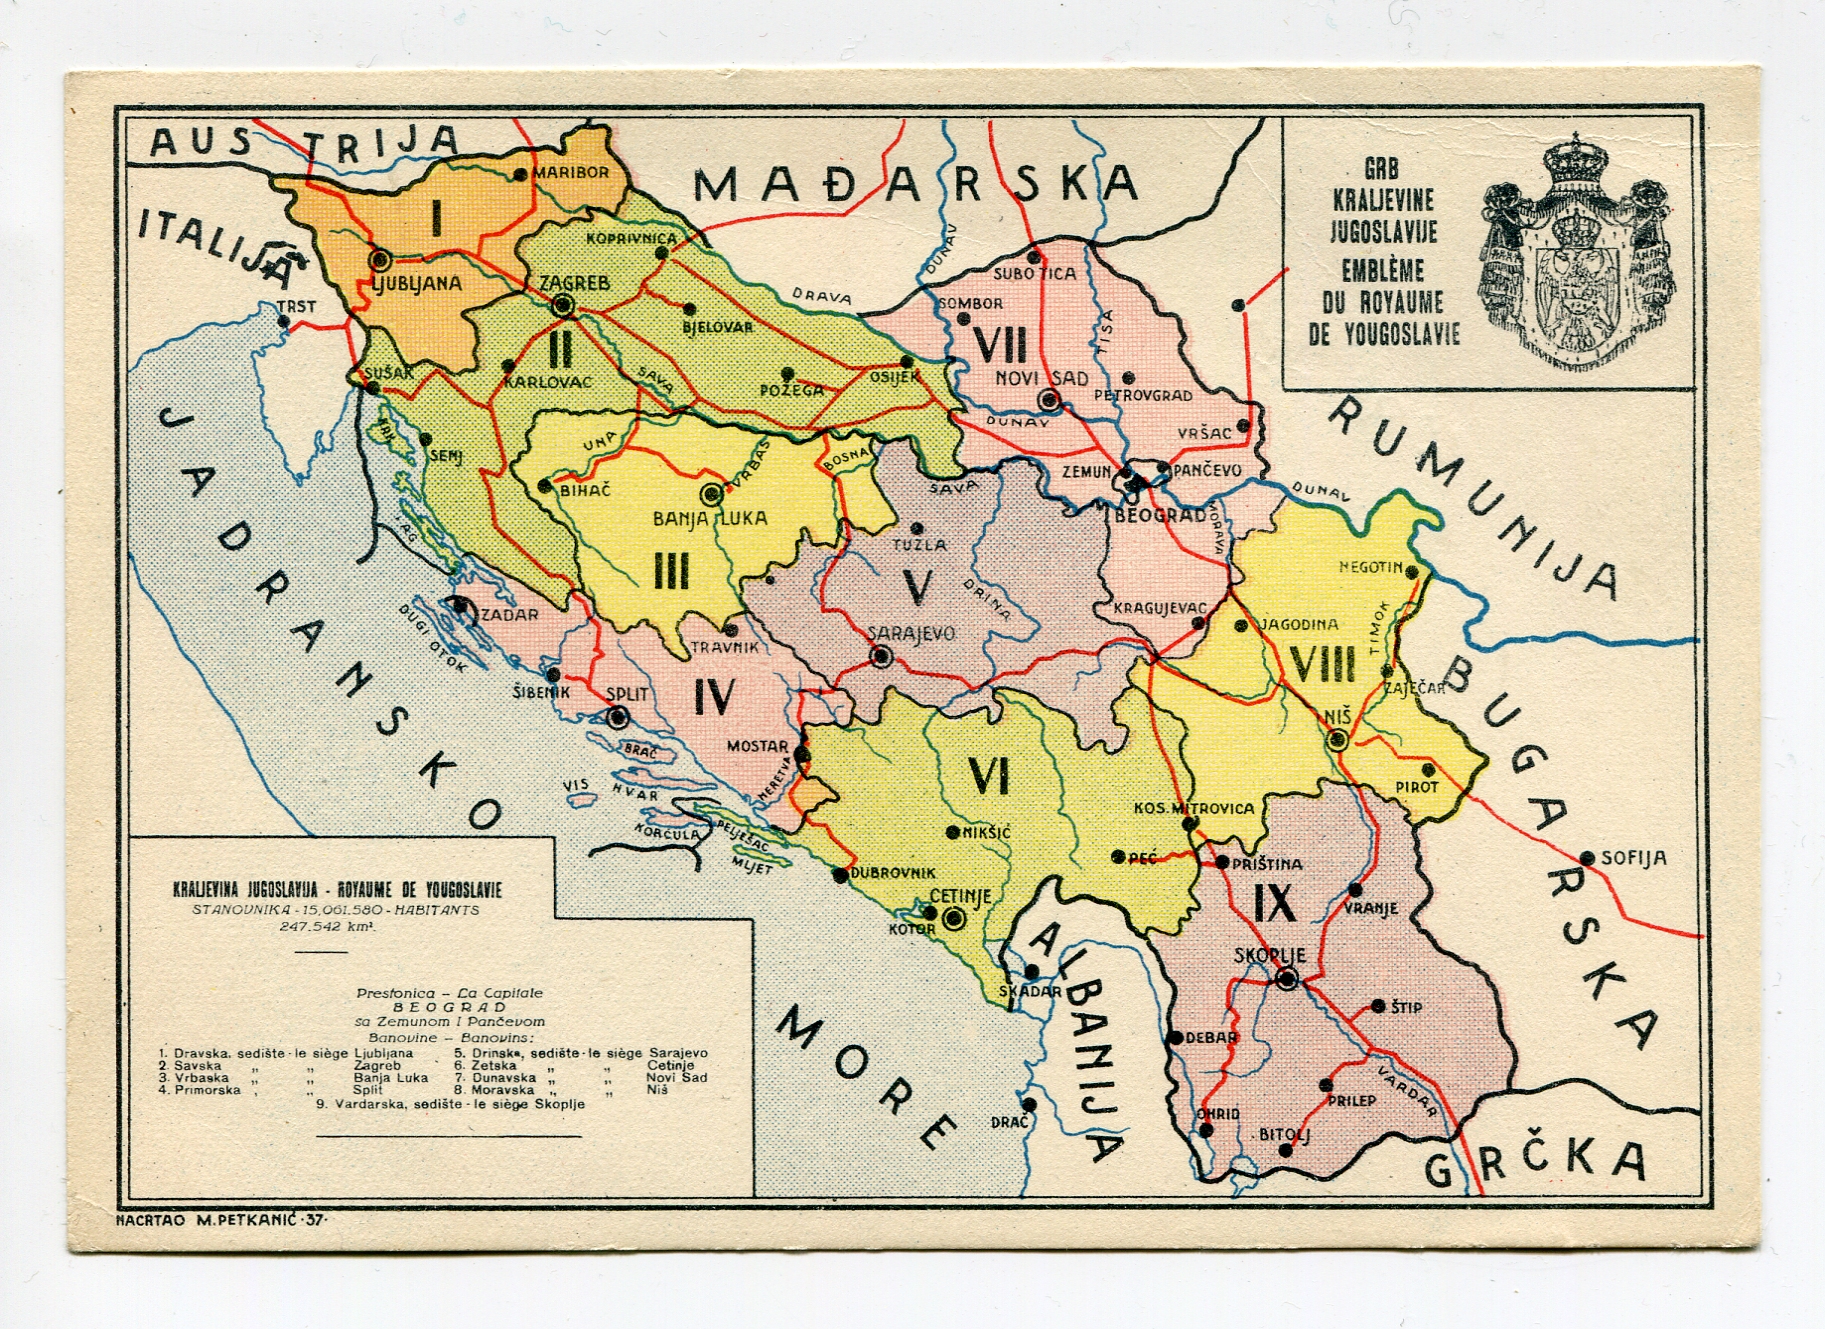 The Map of the Kingdom of Yugoslavia